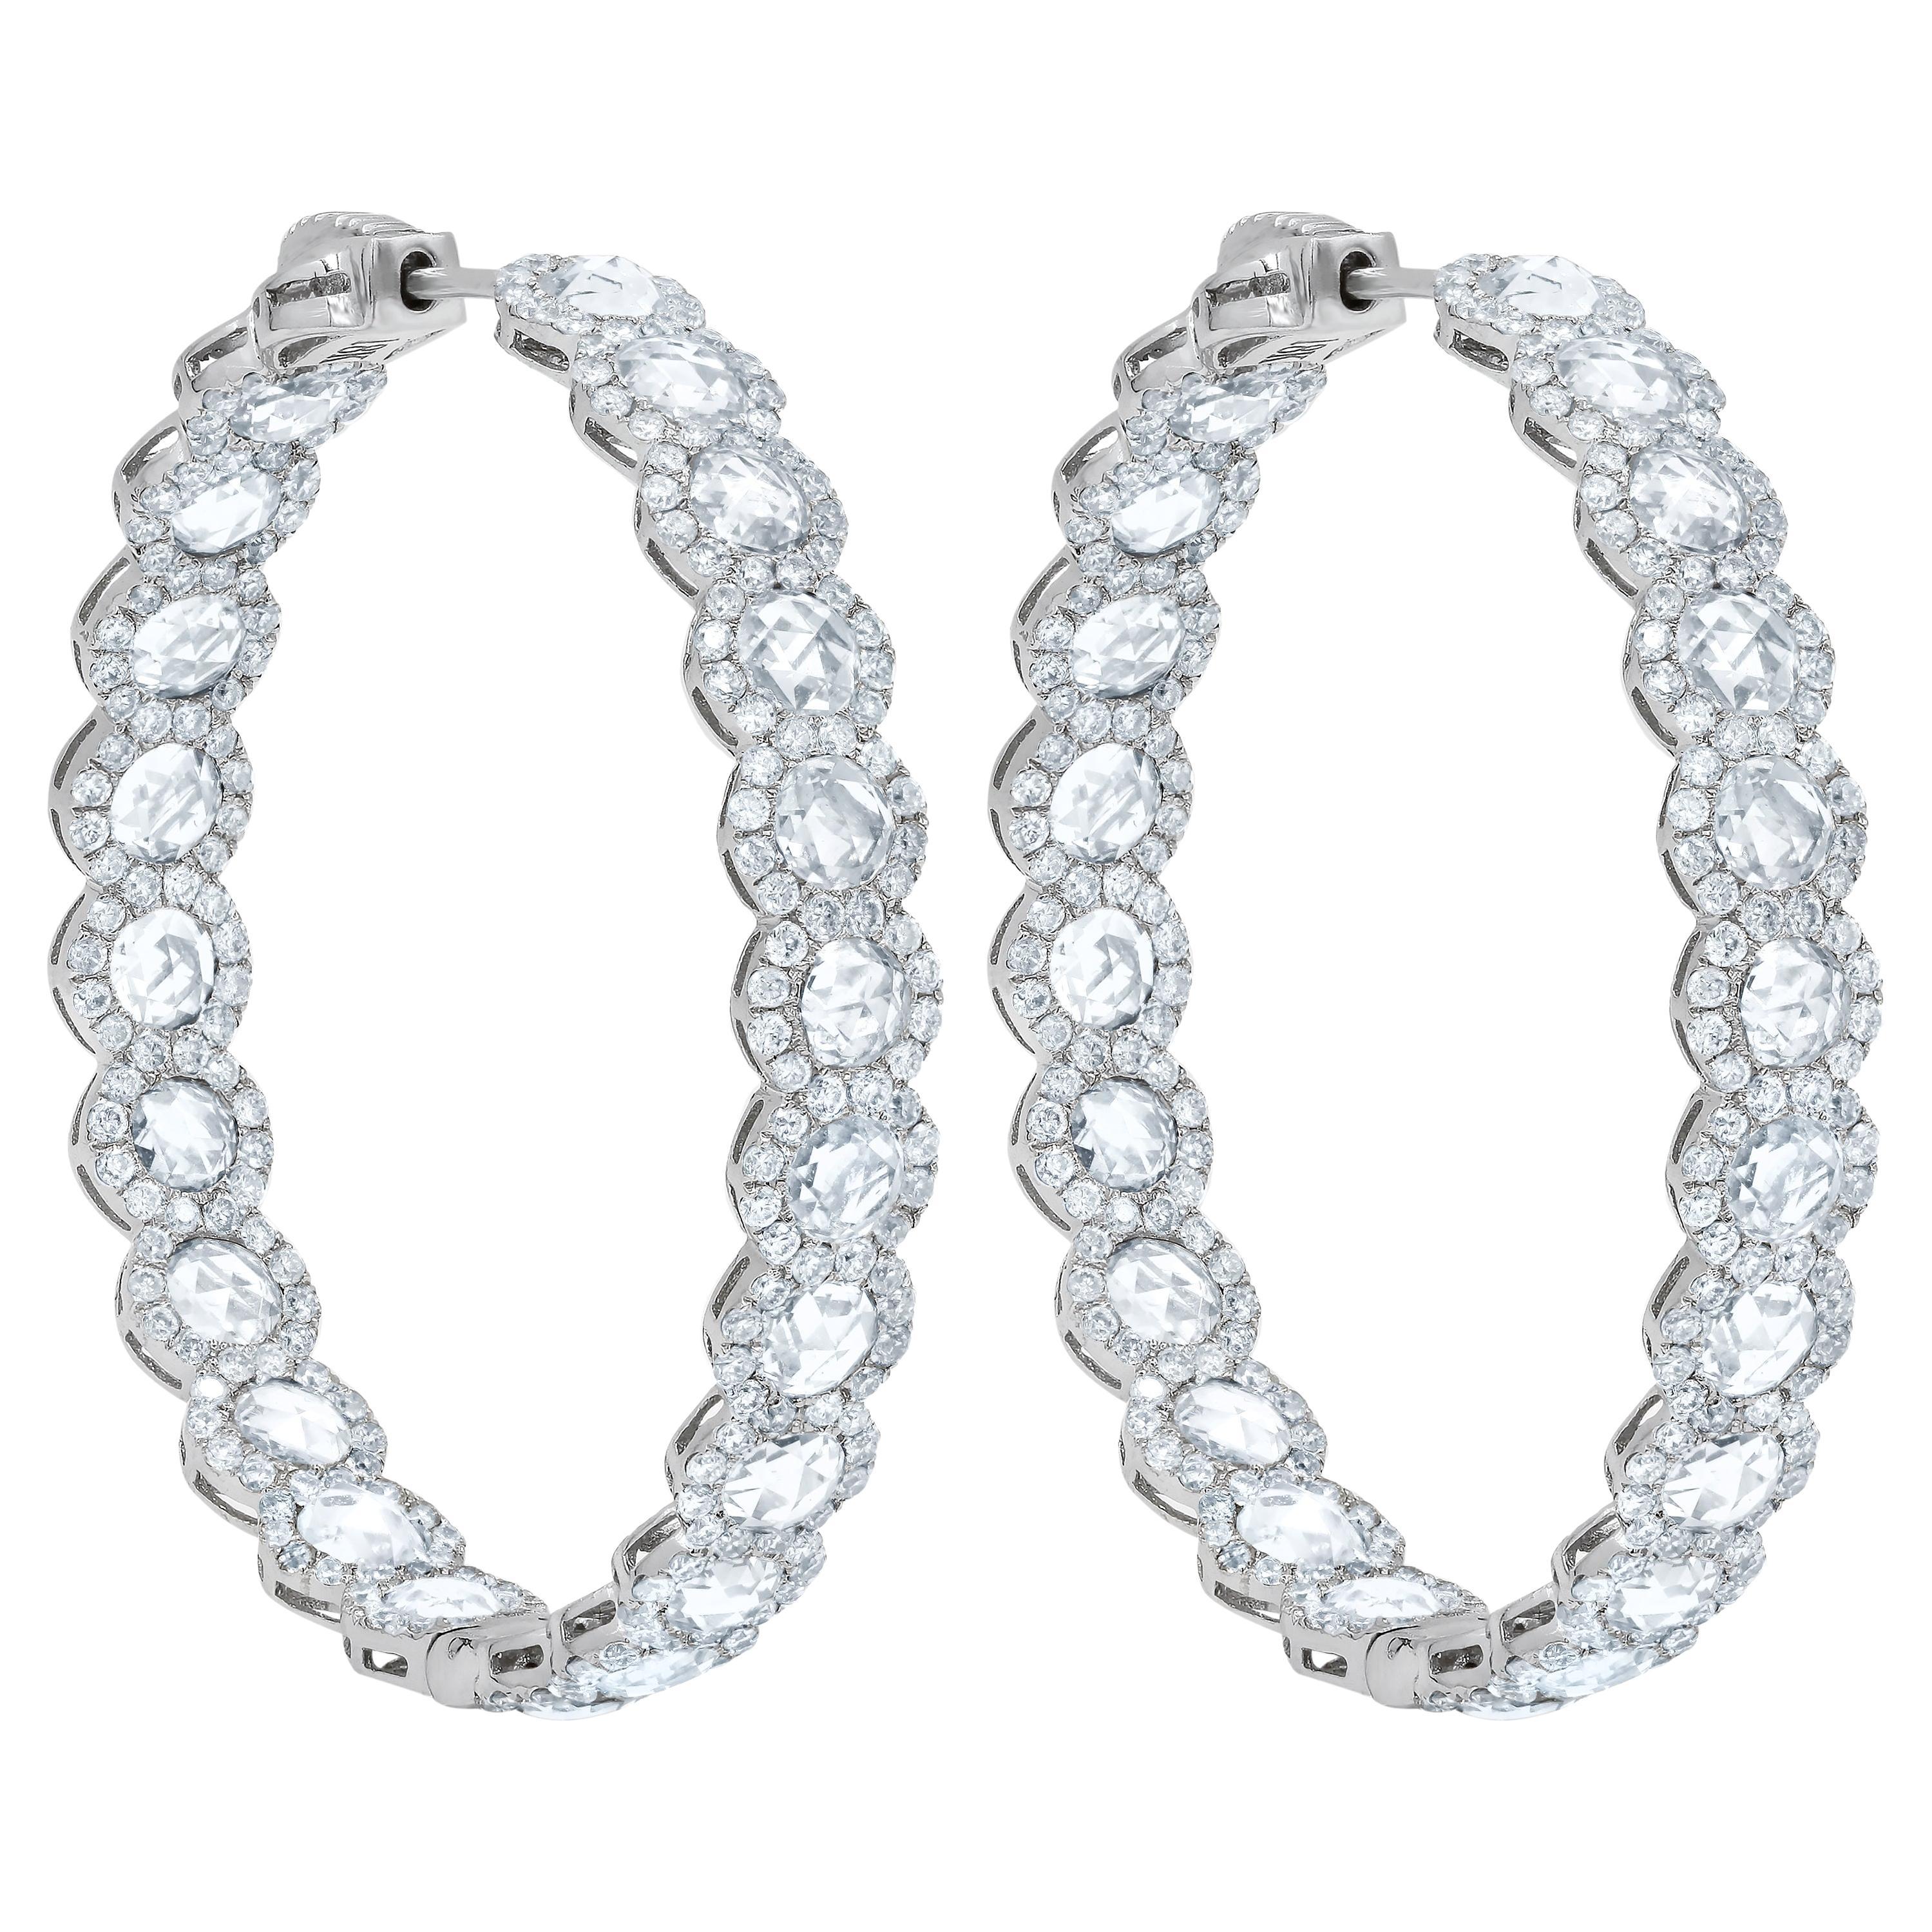 Diana M.  18 kt white gold inside-out hoop earrings with halo design 5.90ct